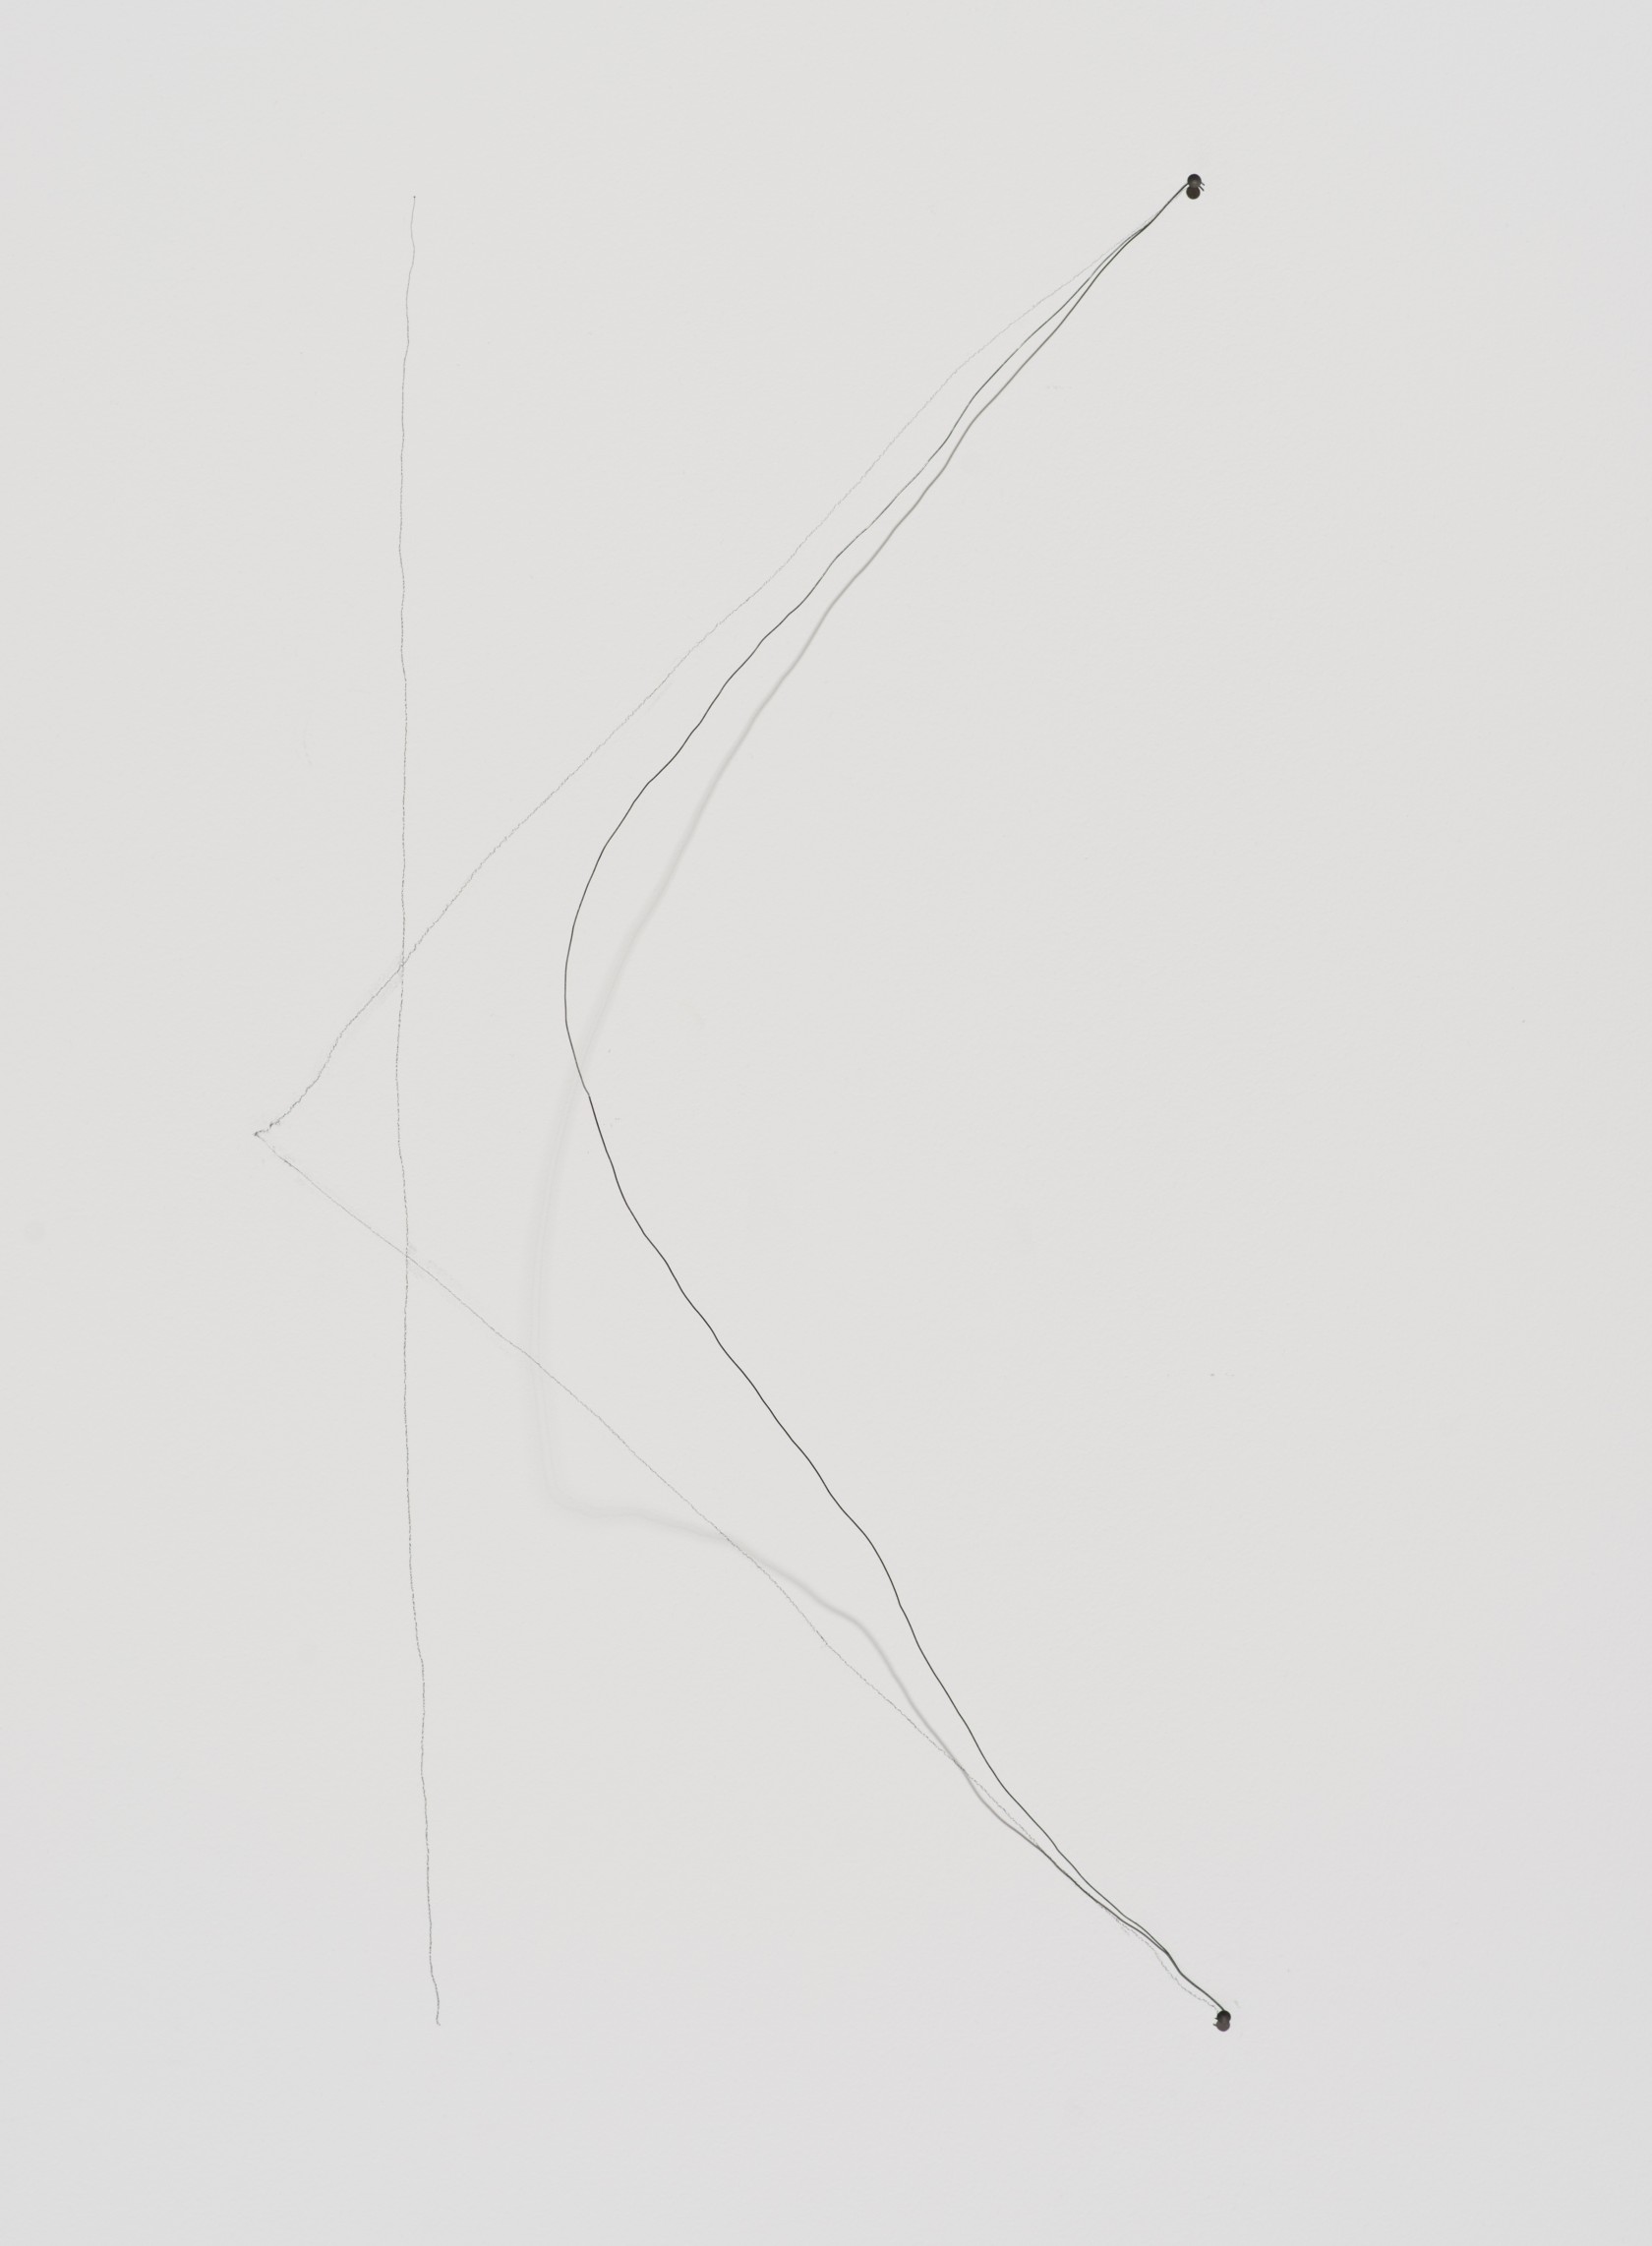 Richard Tuttle, 44th Wire Piece, 1972, wire, template for pencil line, overall 38 1/8 x 19 1/4 x 9 1/4 in. (119.4 x 55.9 x 28.6 cm); wire approx. 58 in. The Museum of Contemporary Art, Los Angeles. Gift of Lannan Foundation.